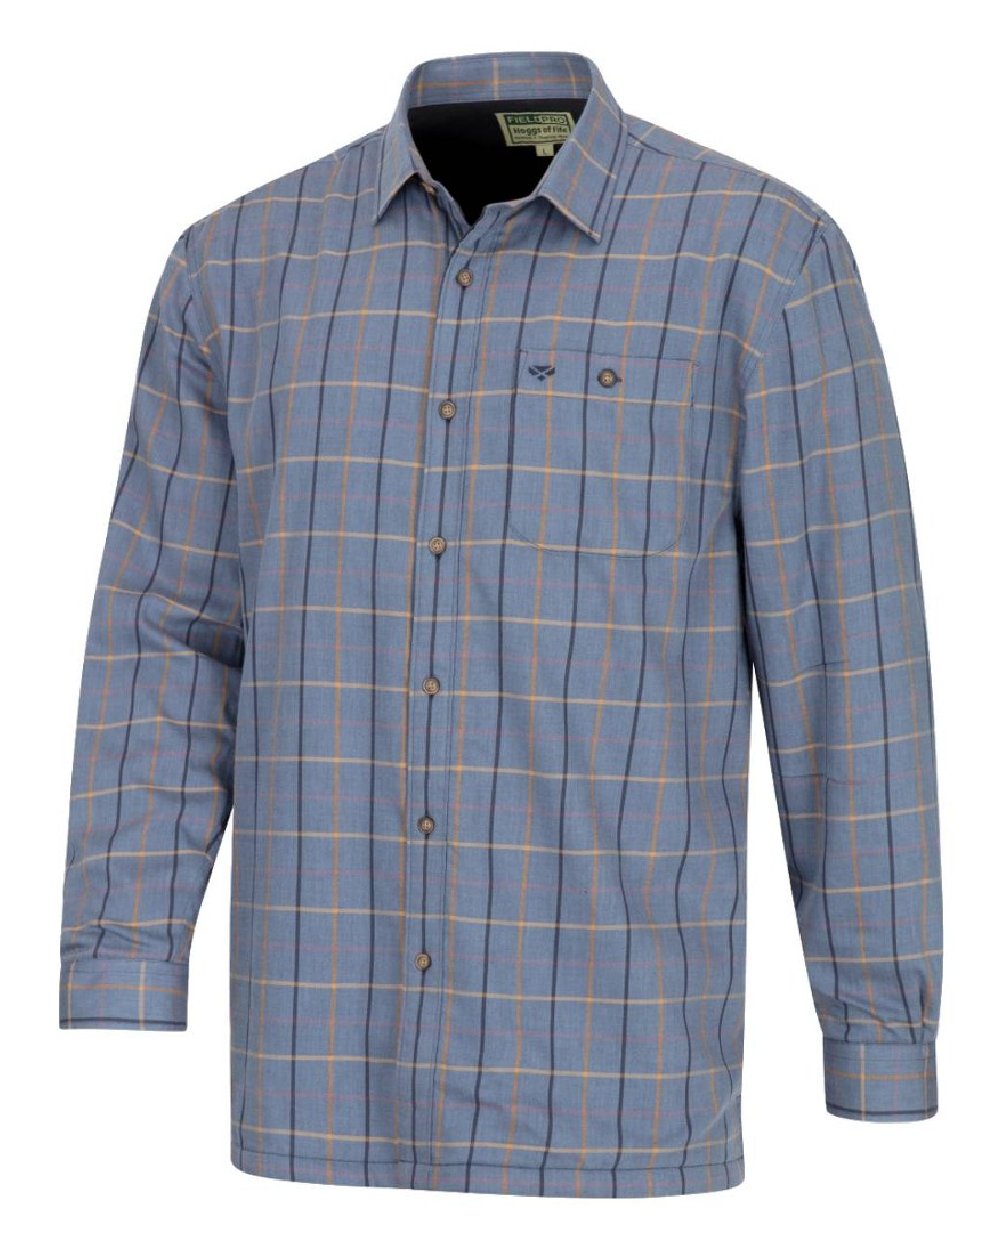 Hoggs of Fife Micro Fleece Lined Shirt in Blackthorn 